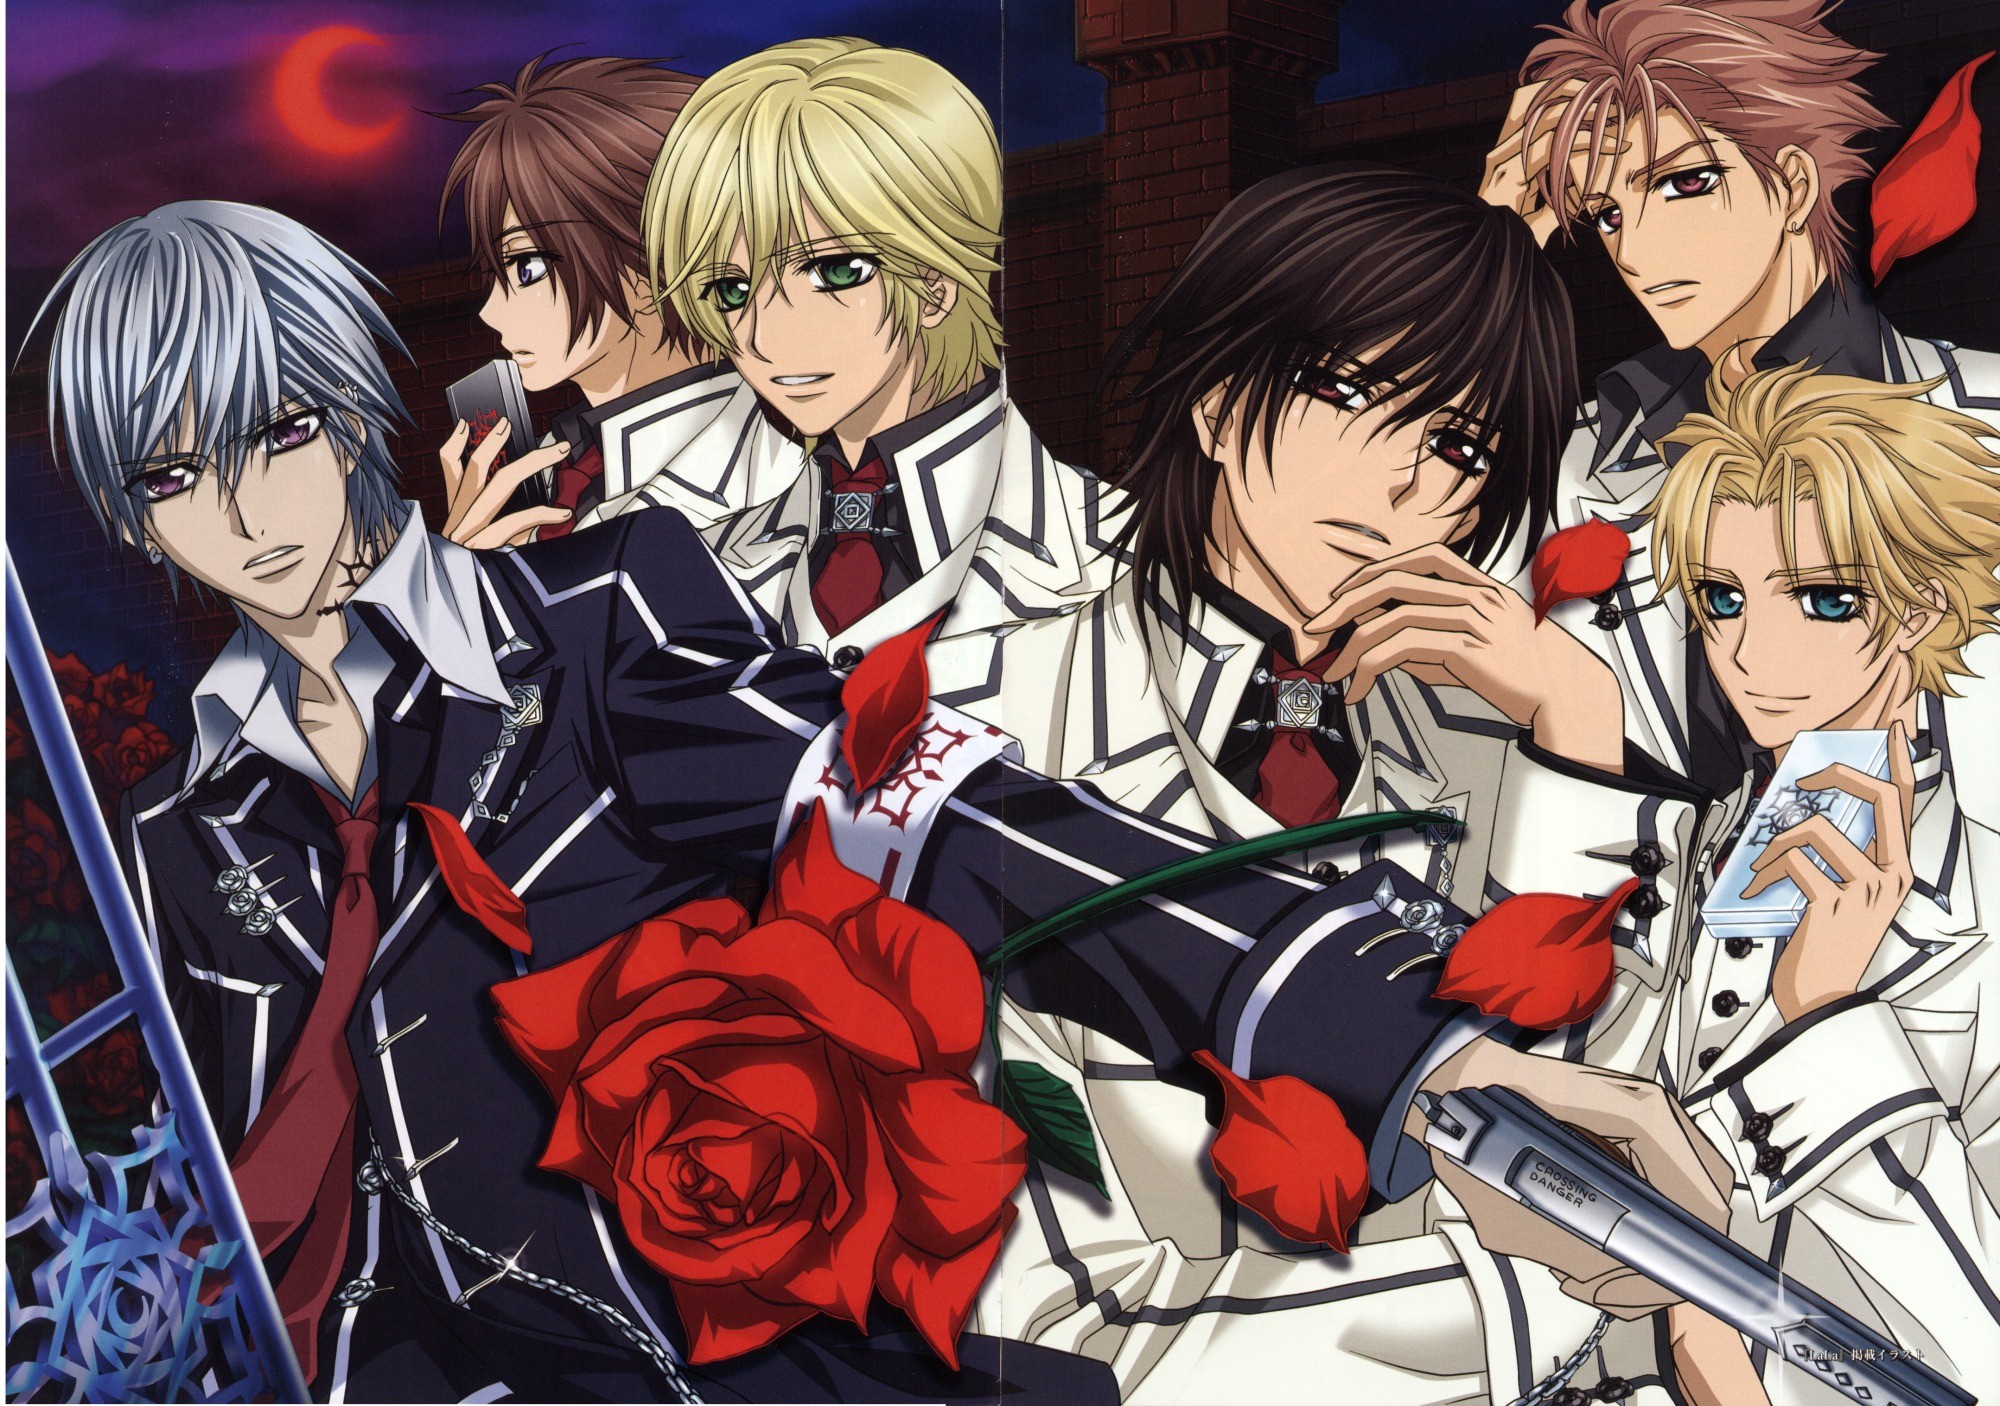 Texas library denies request to remove vampire knight manga